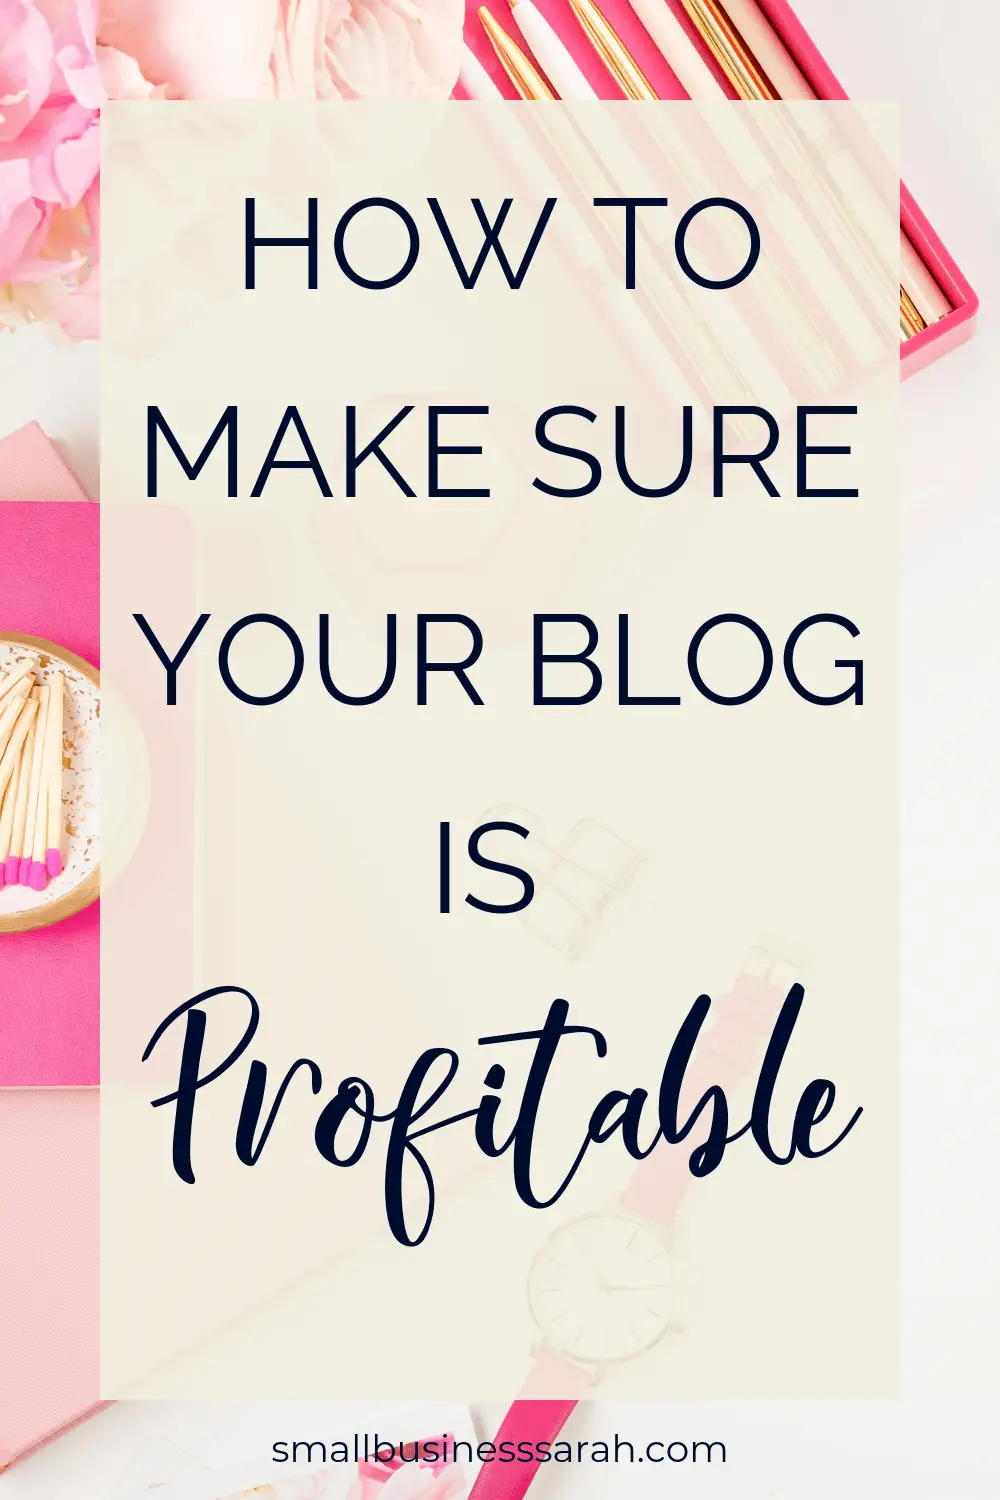 How to Make Sure Your Blog is Profitable